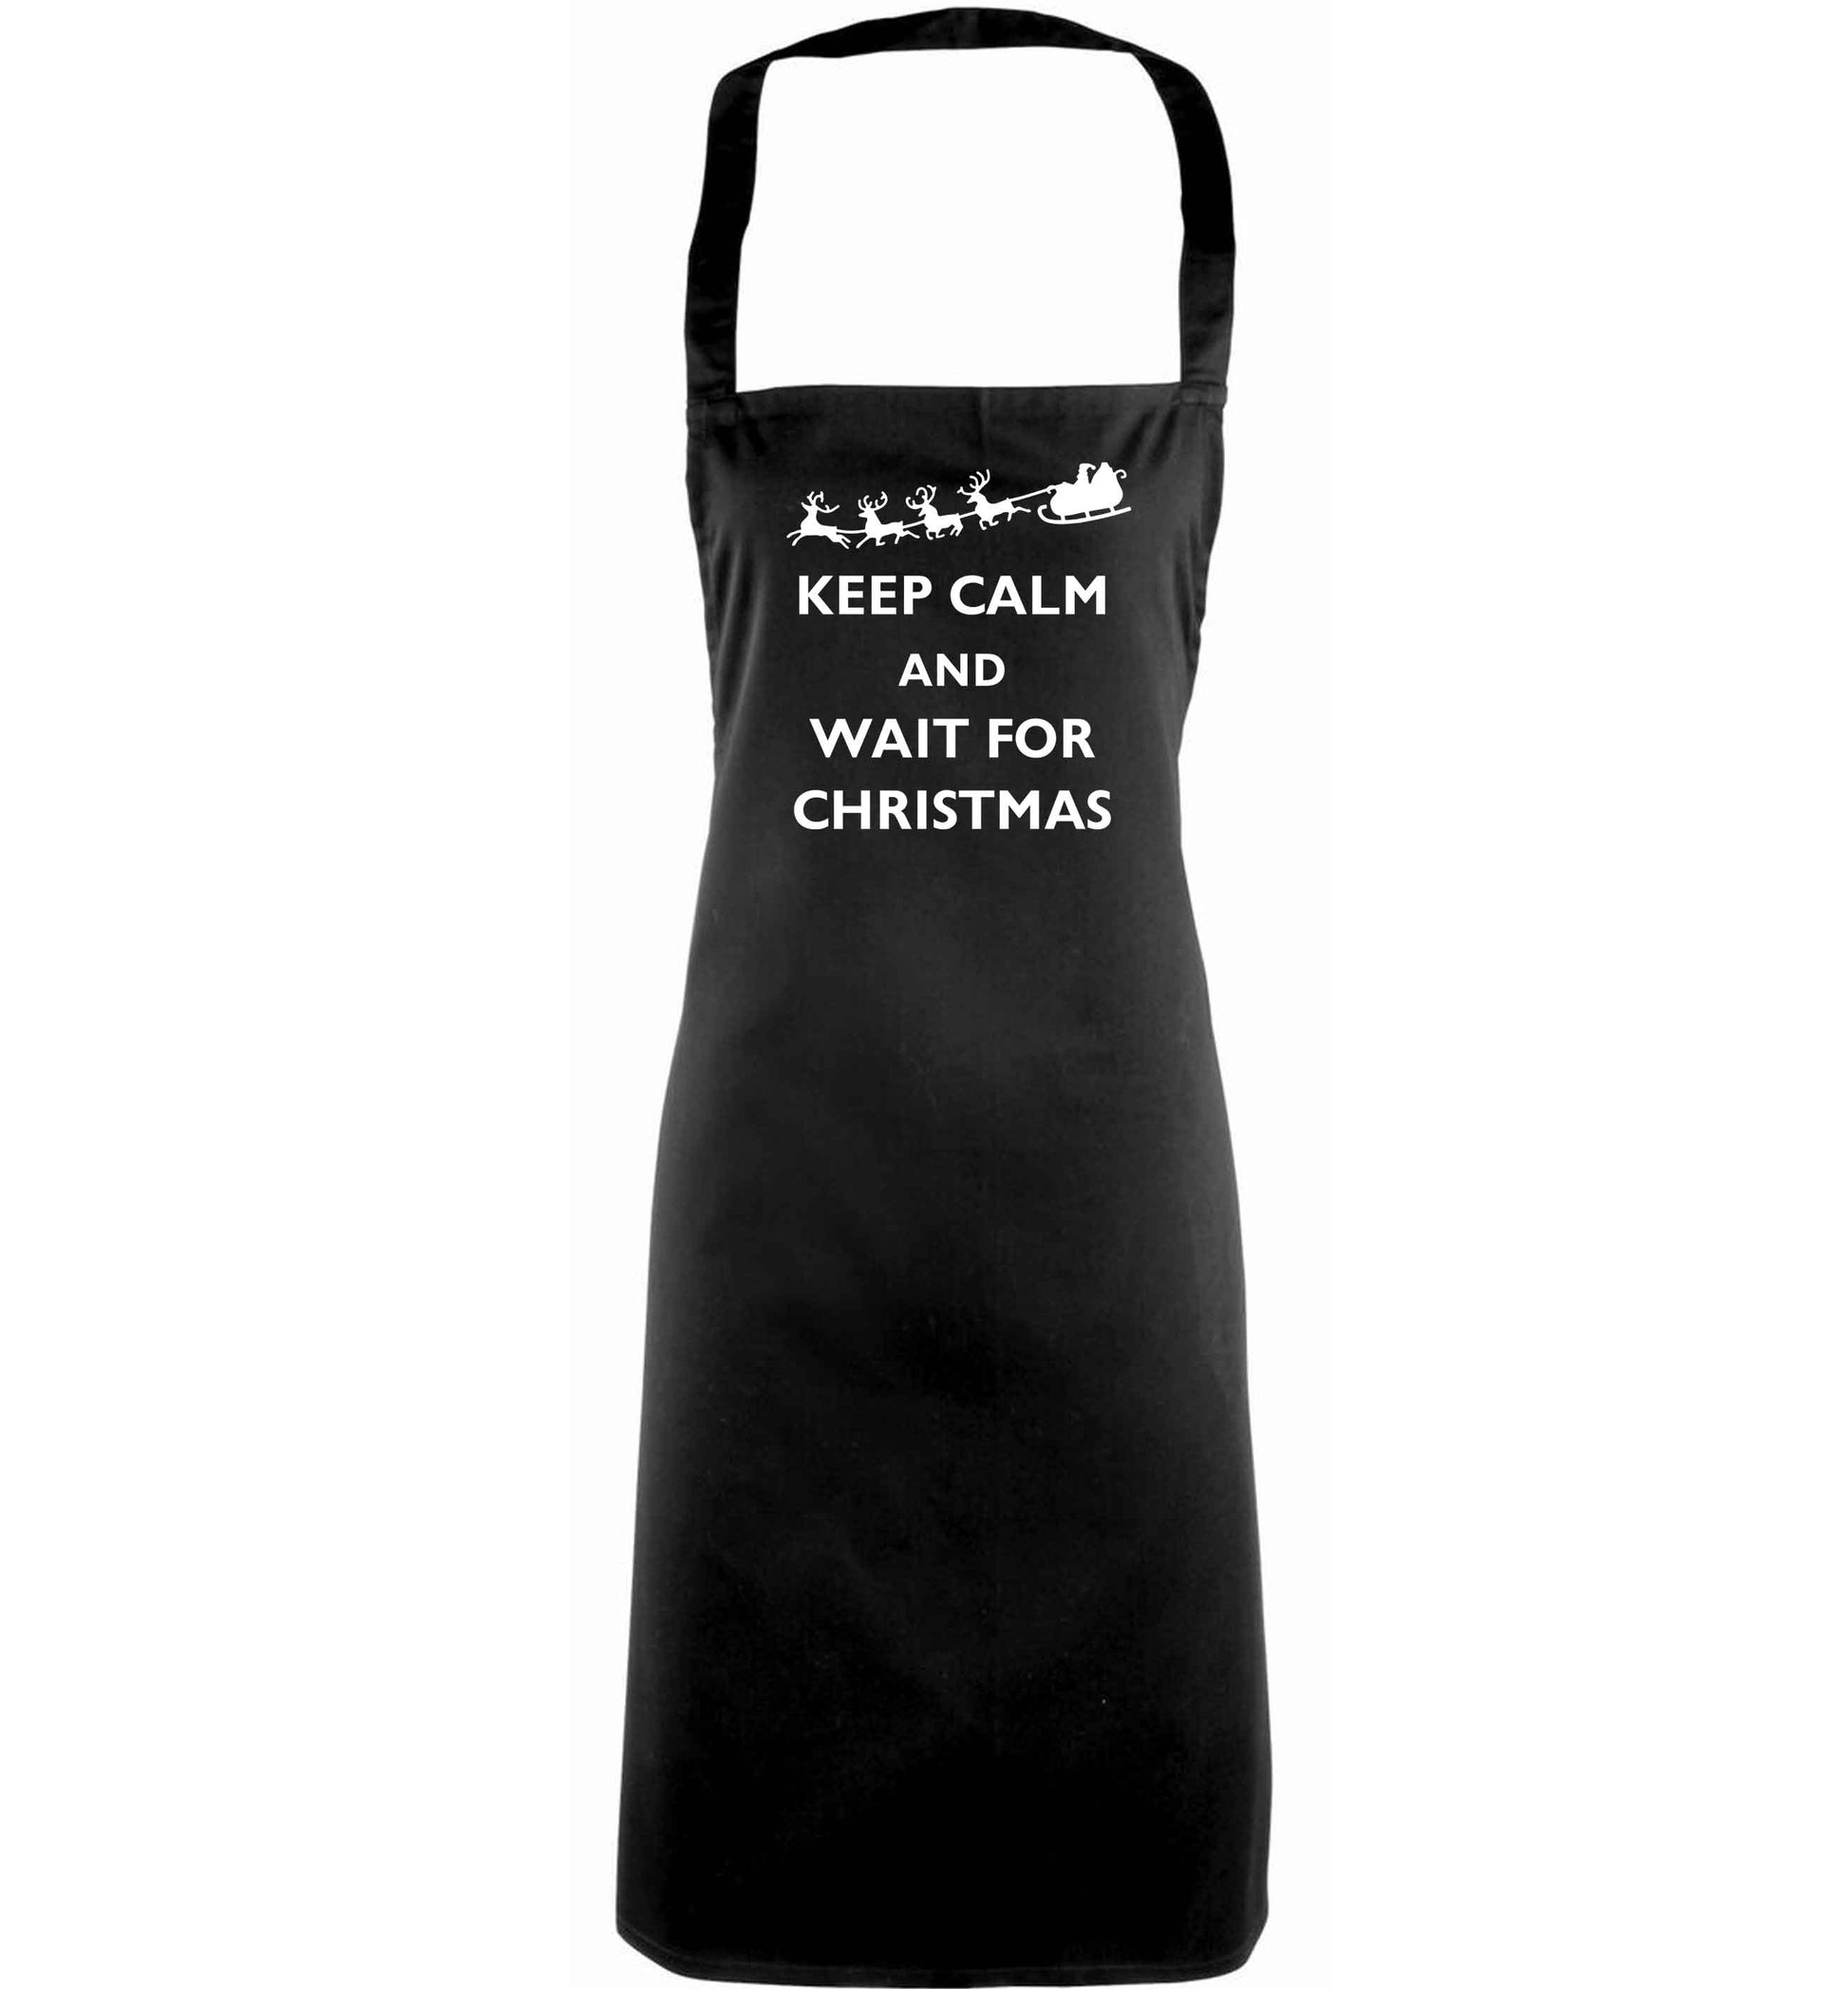 Keep calm and wait for Christmas adults black apron